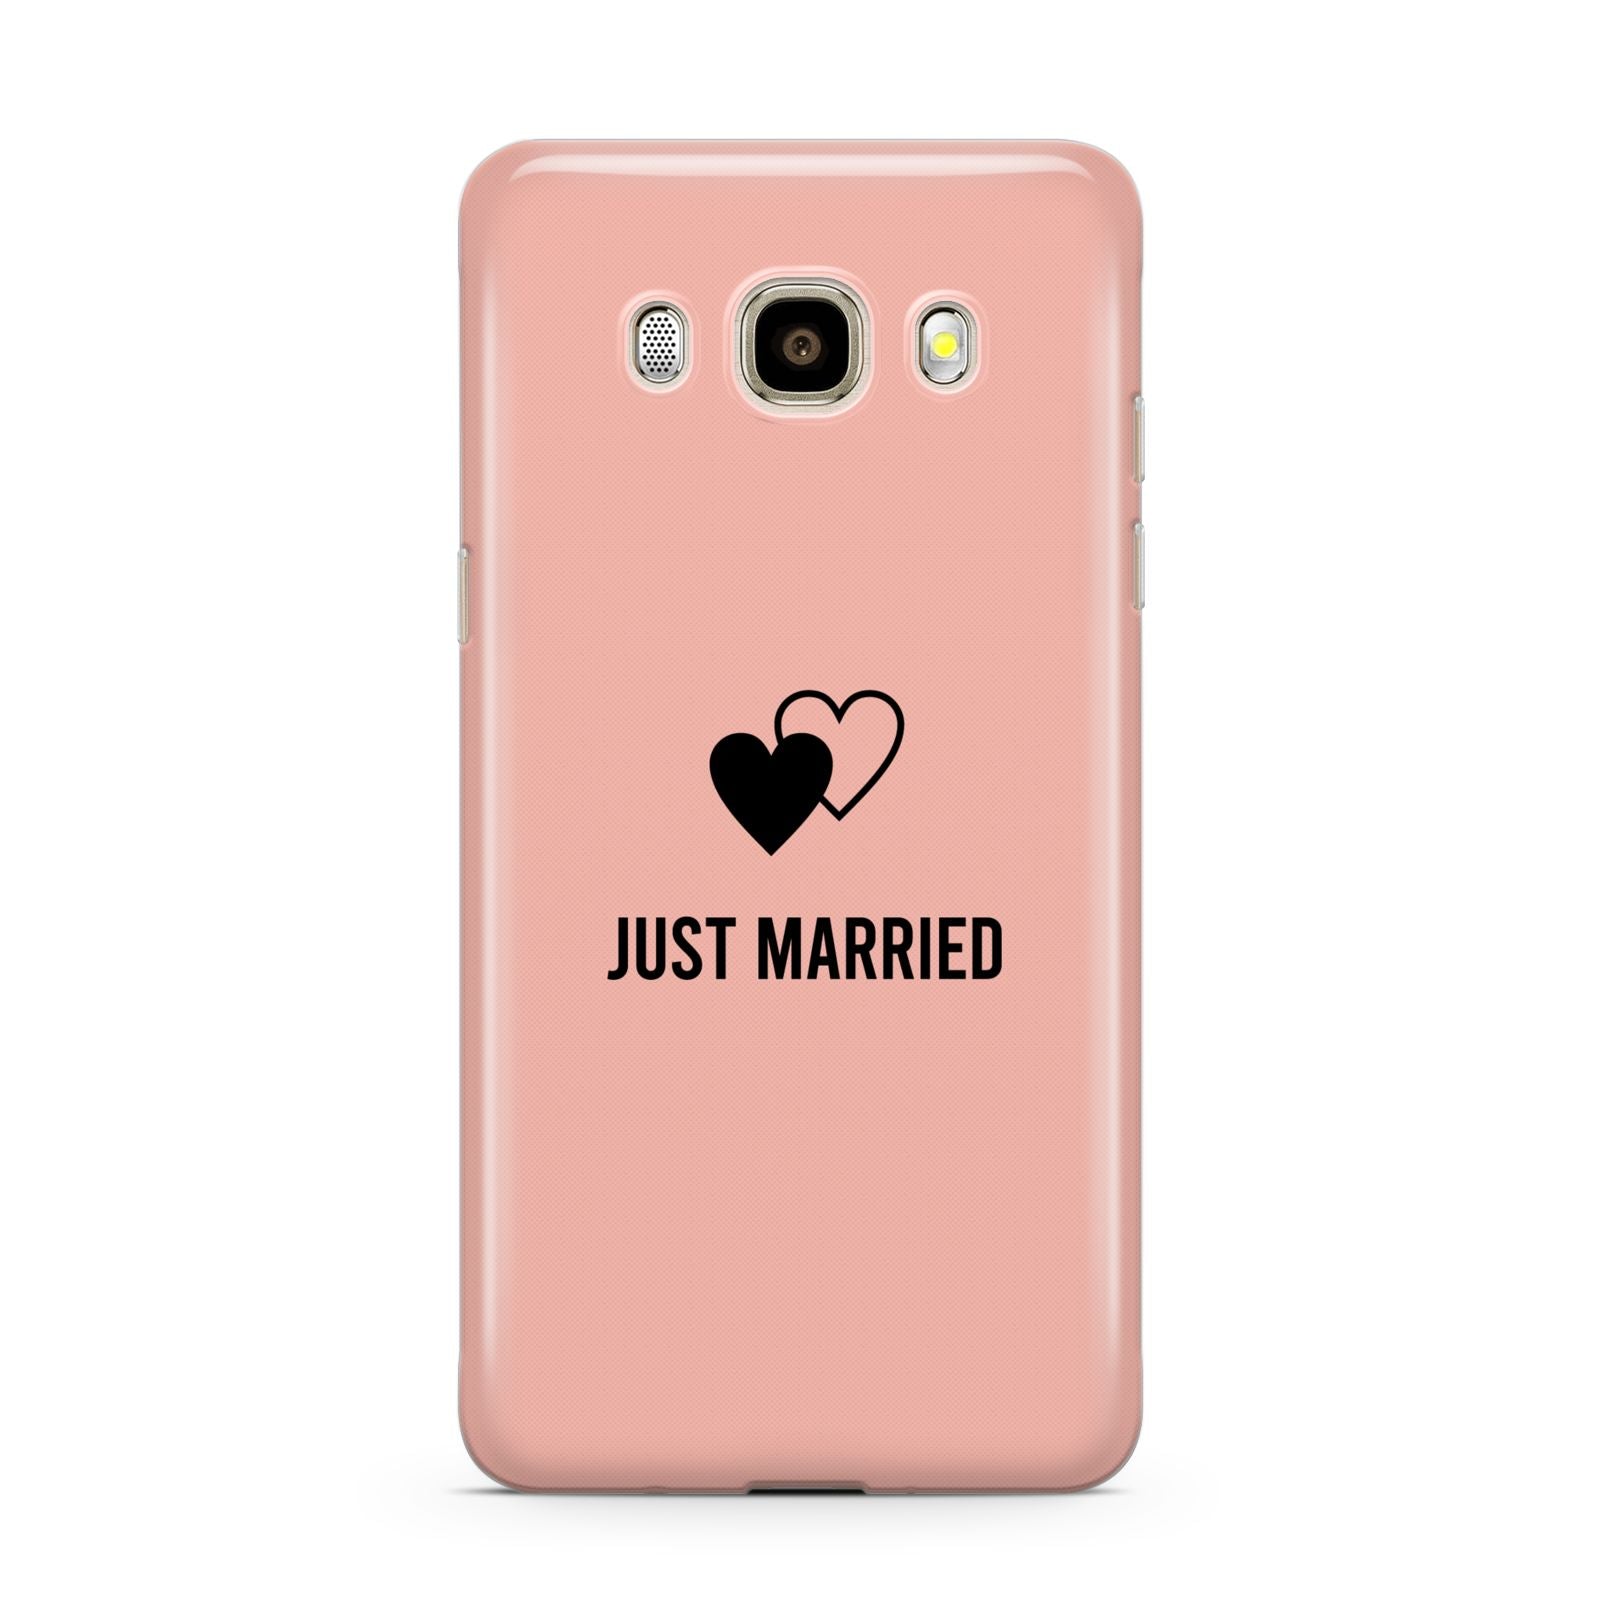 Just Married Samsung Galaxy J7 2016 Case on gold phone